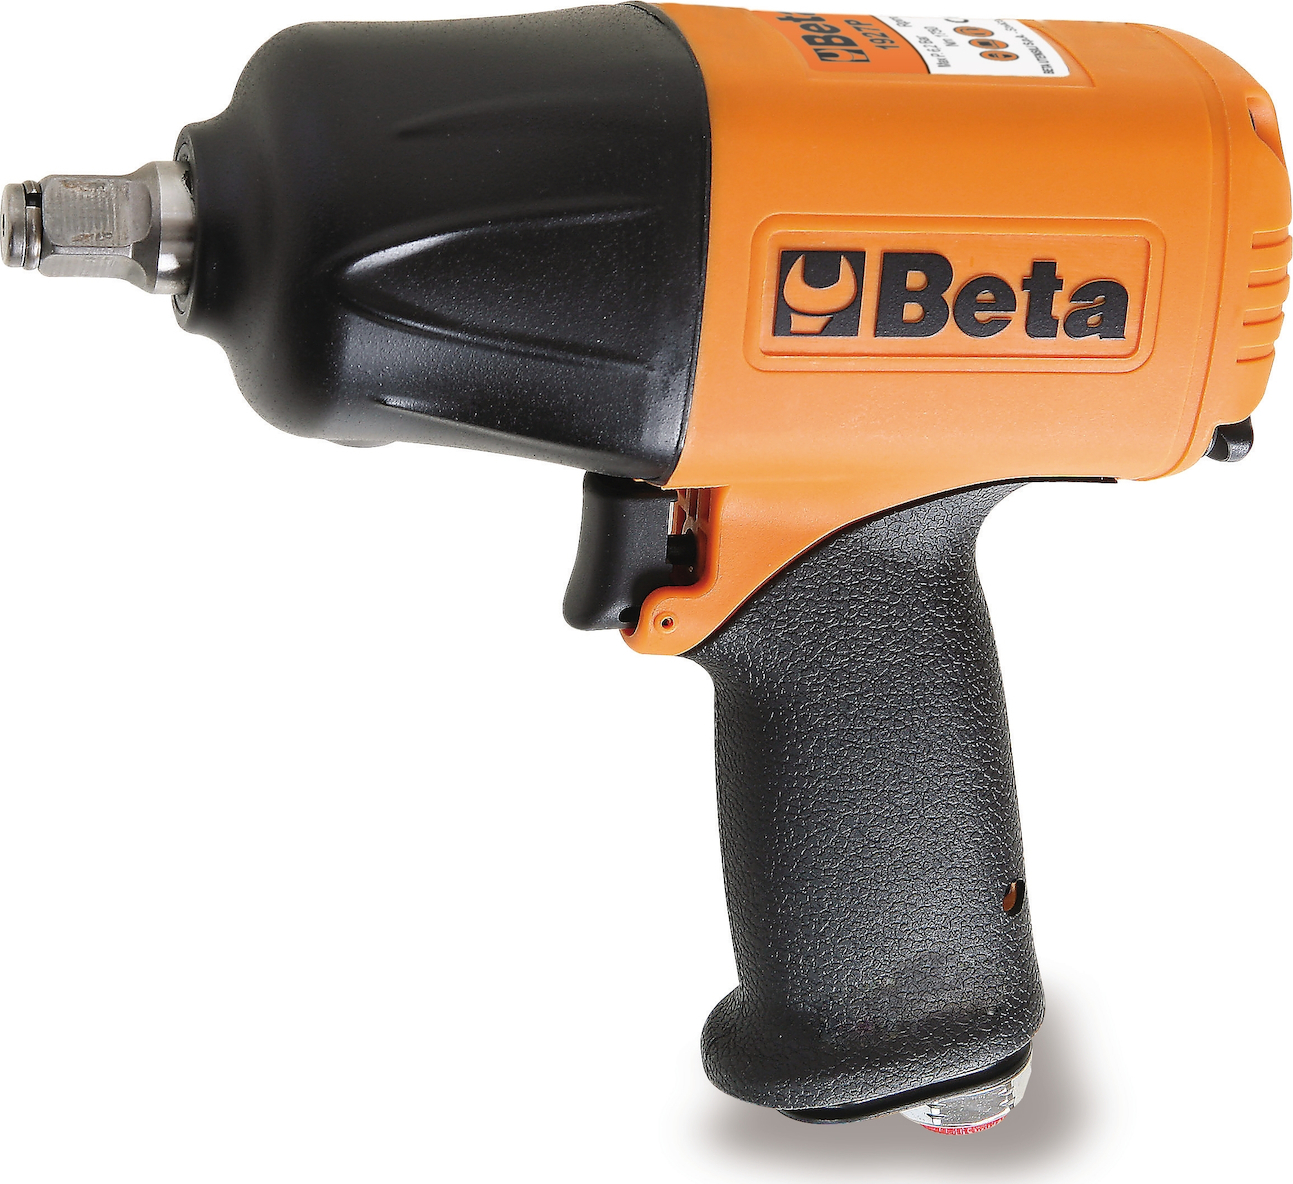 1927P Reversible Impact Wrench from Composite Material 1/2" Beta - 1